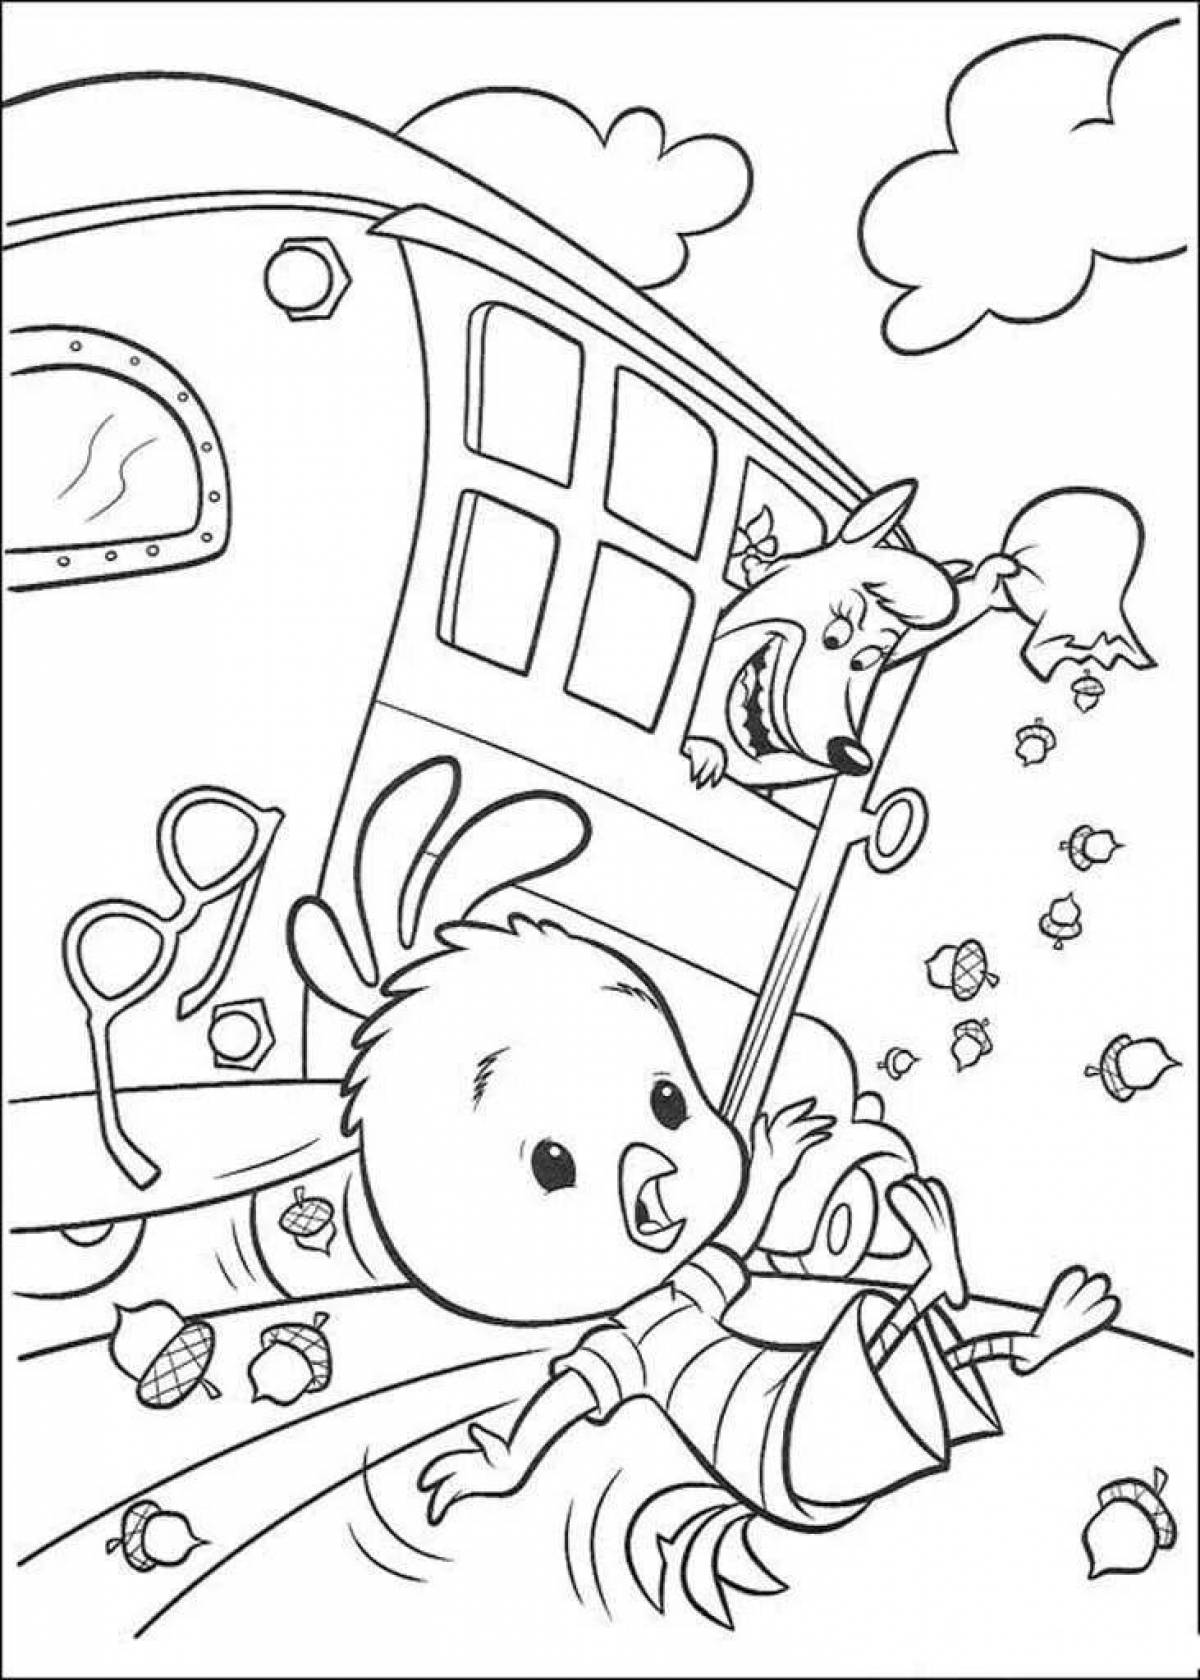 Excited chick coloring page